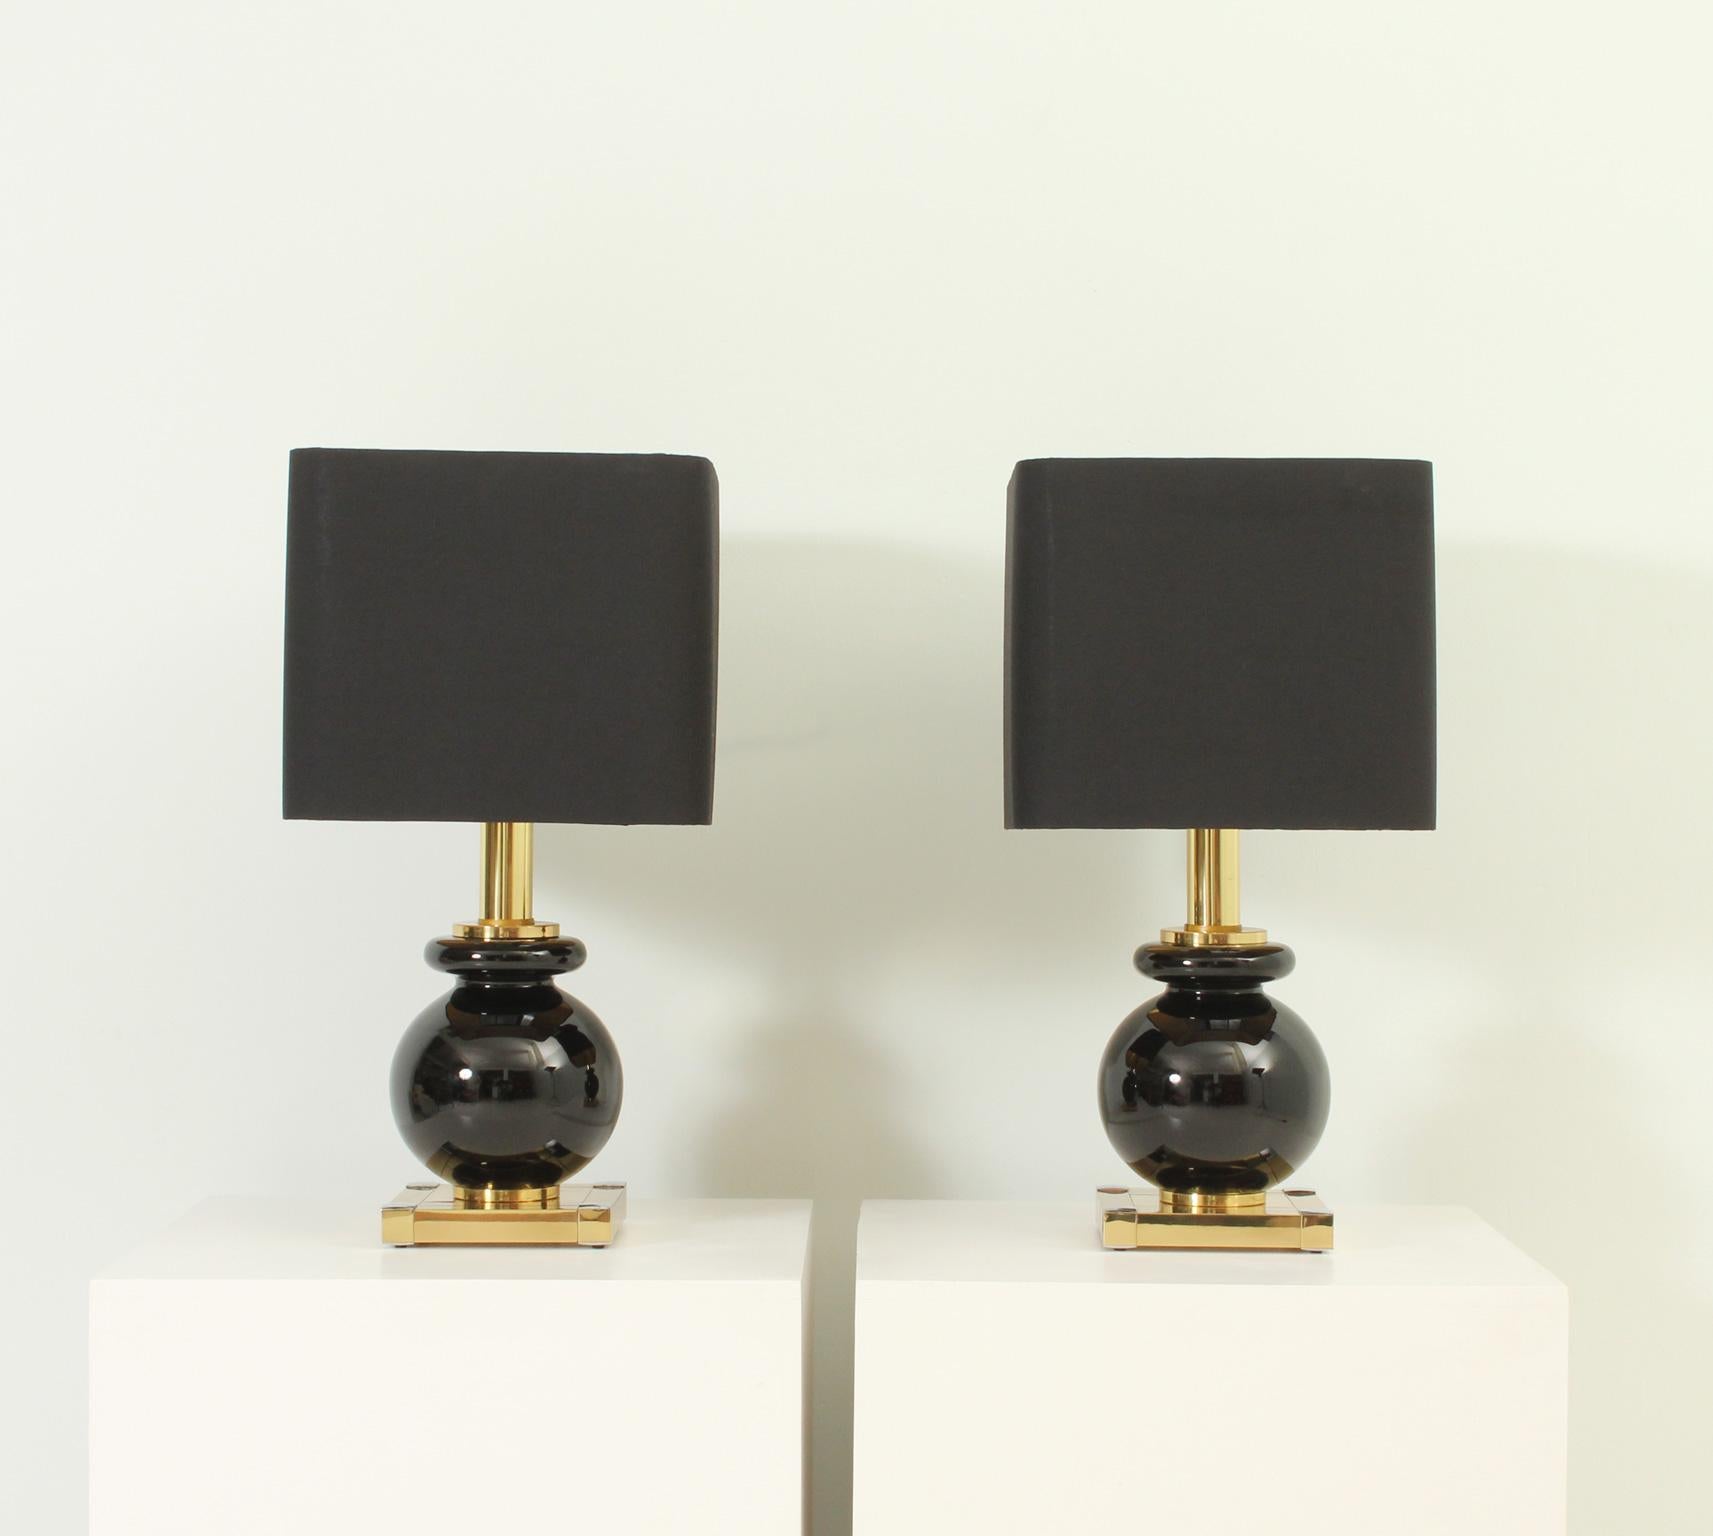 Modern Pair of Lumica Table Lamps in Brass and Glass, Spain, 1970's For Sale